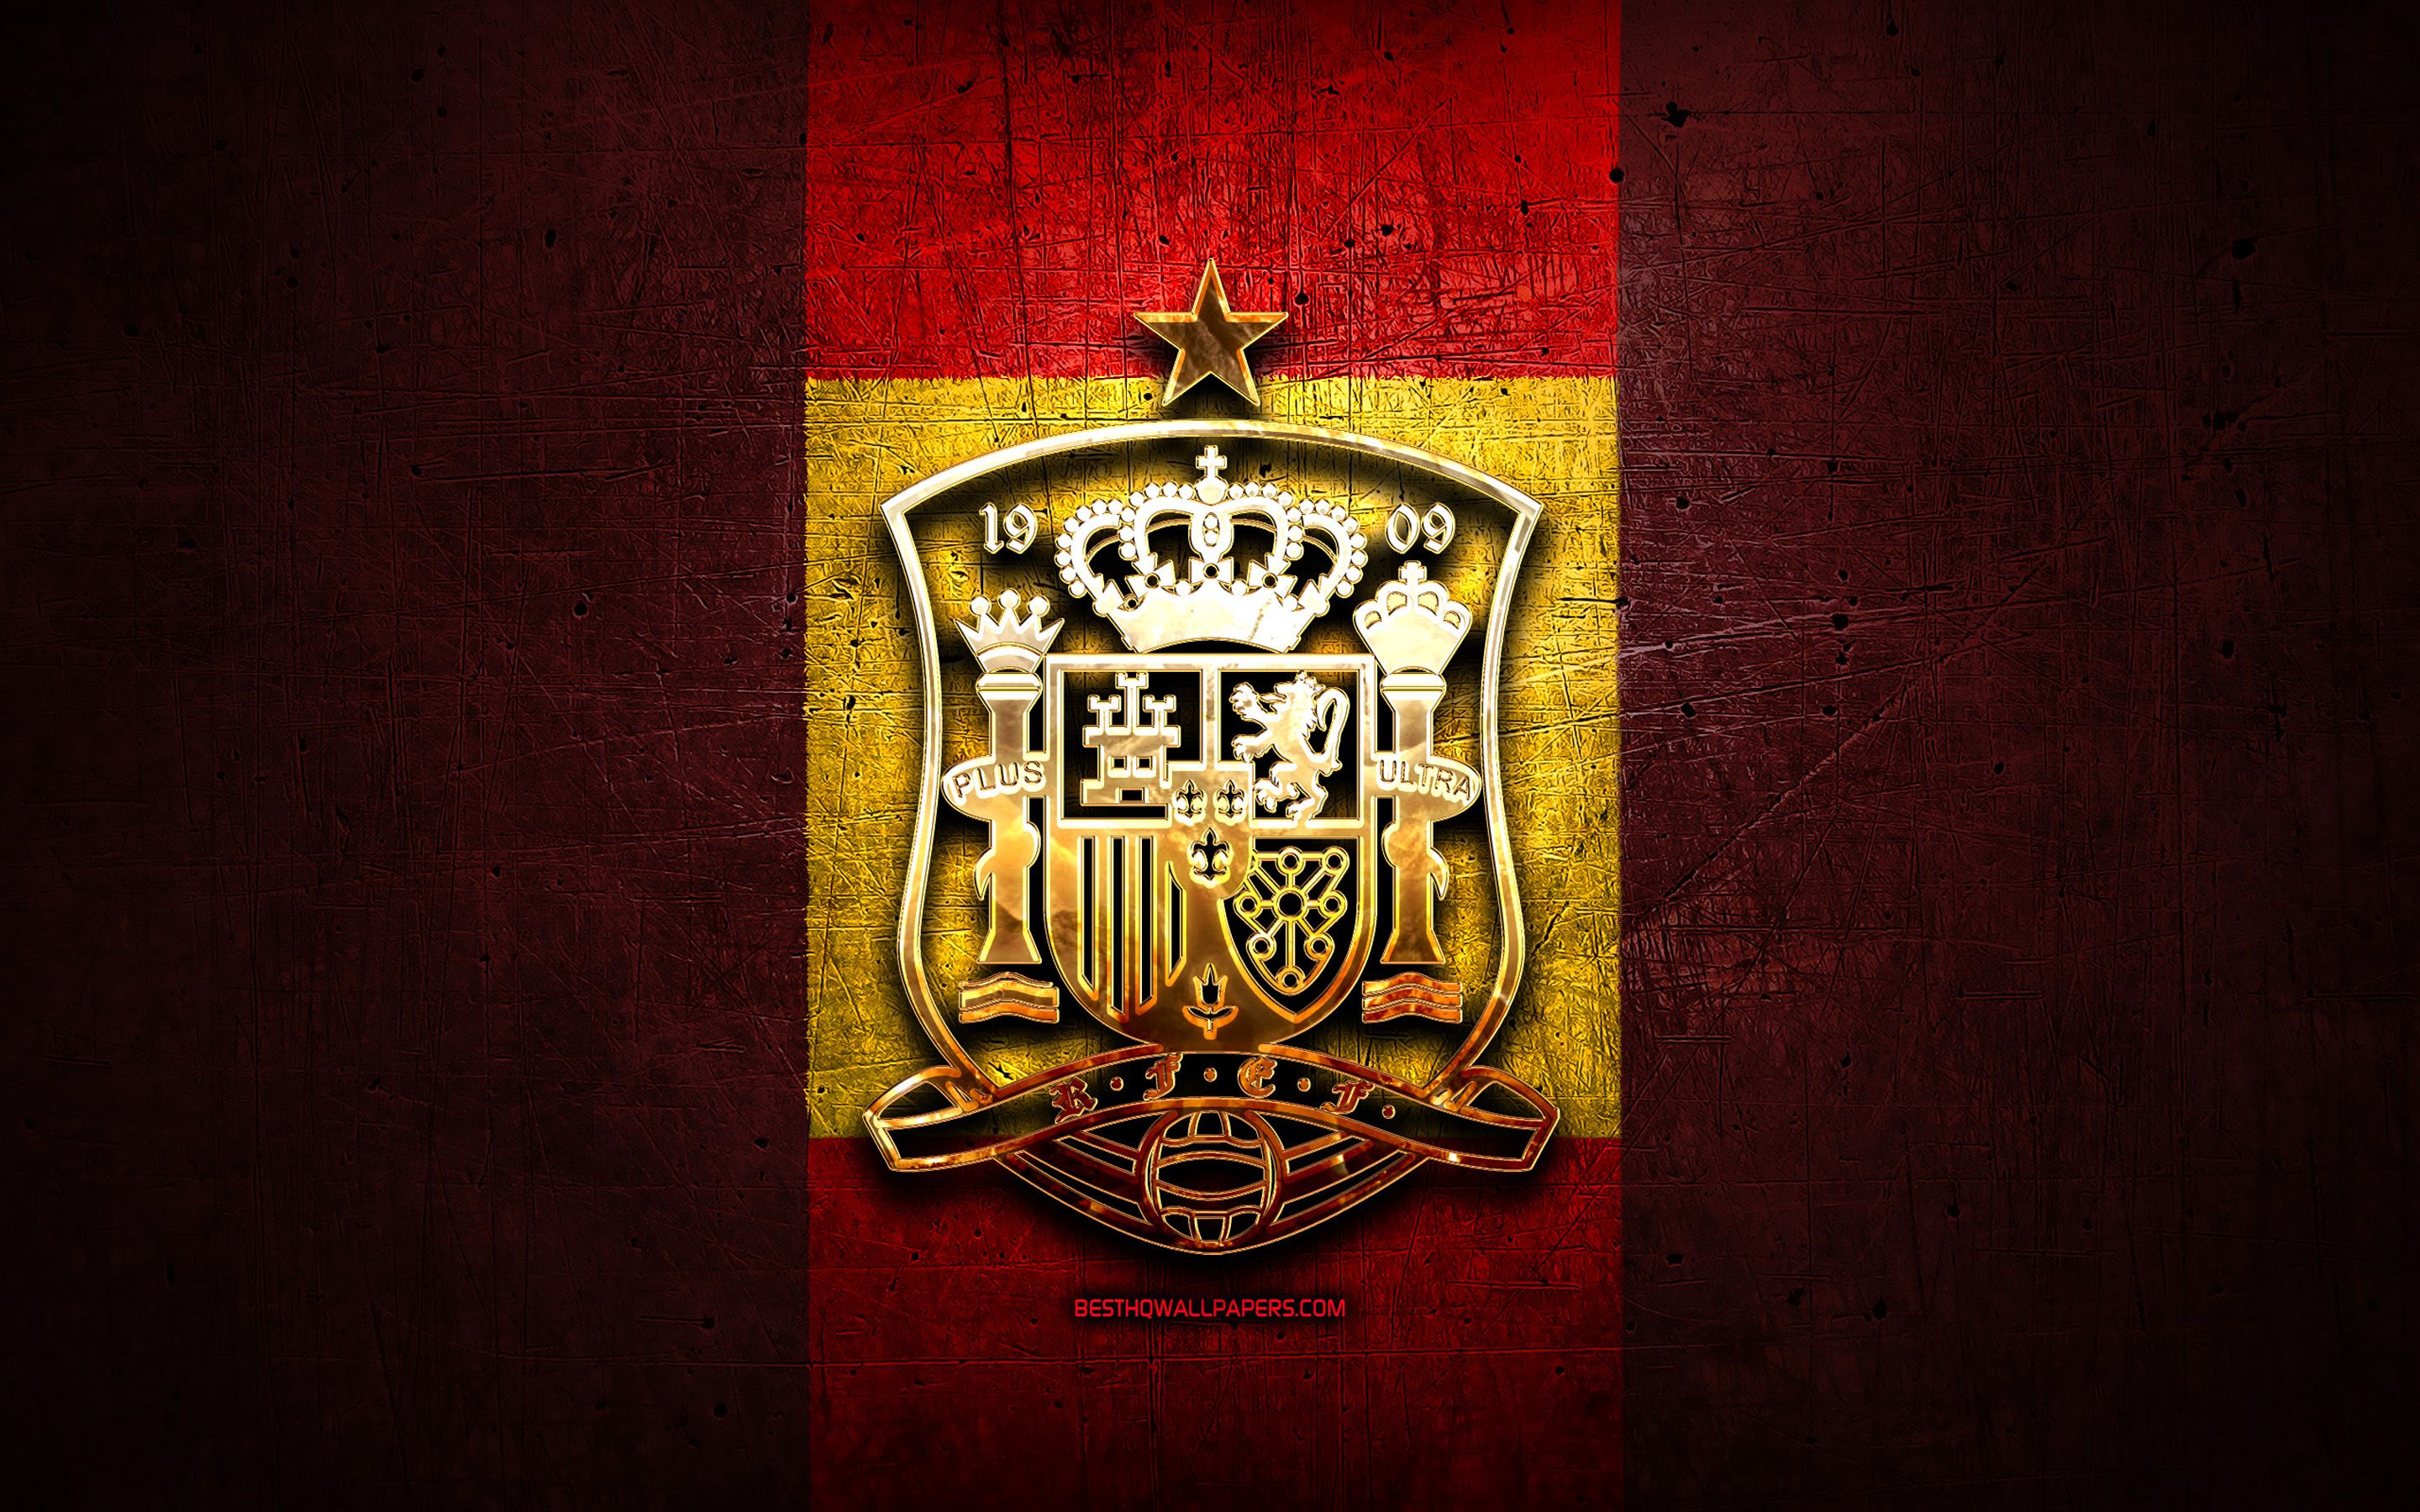 Download wallpaper Spain National Football Team, golden logo, Europe, UEFA, red metal background, Spanish football team, soccer, RSFF logo, football, Spain for desktop with resolution 2880x1800. High Quality HD picture wallpaper